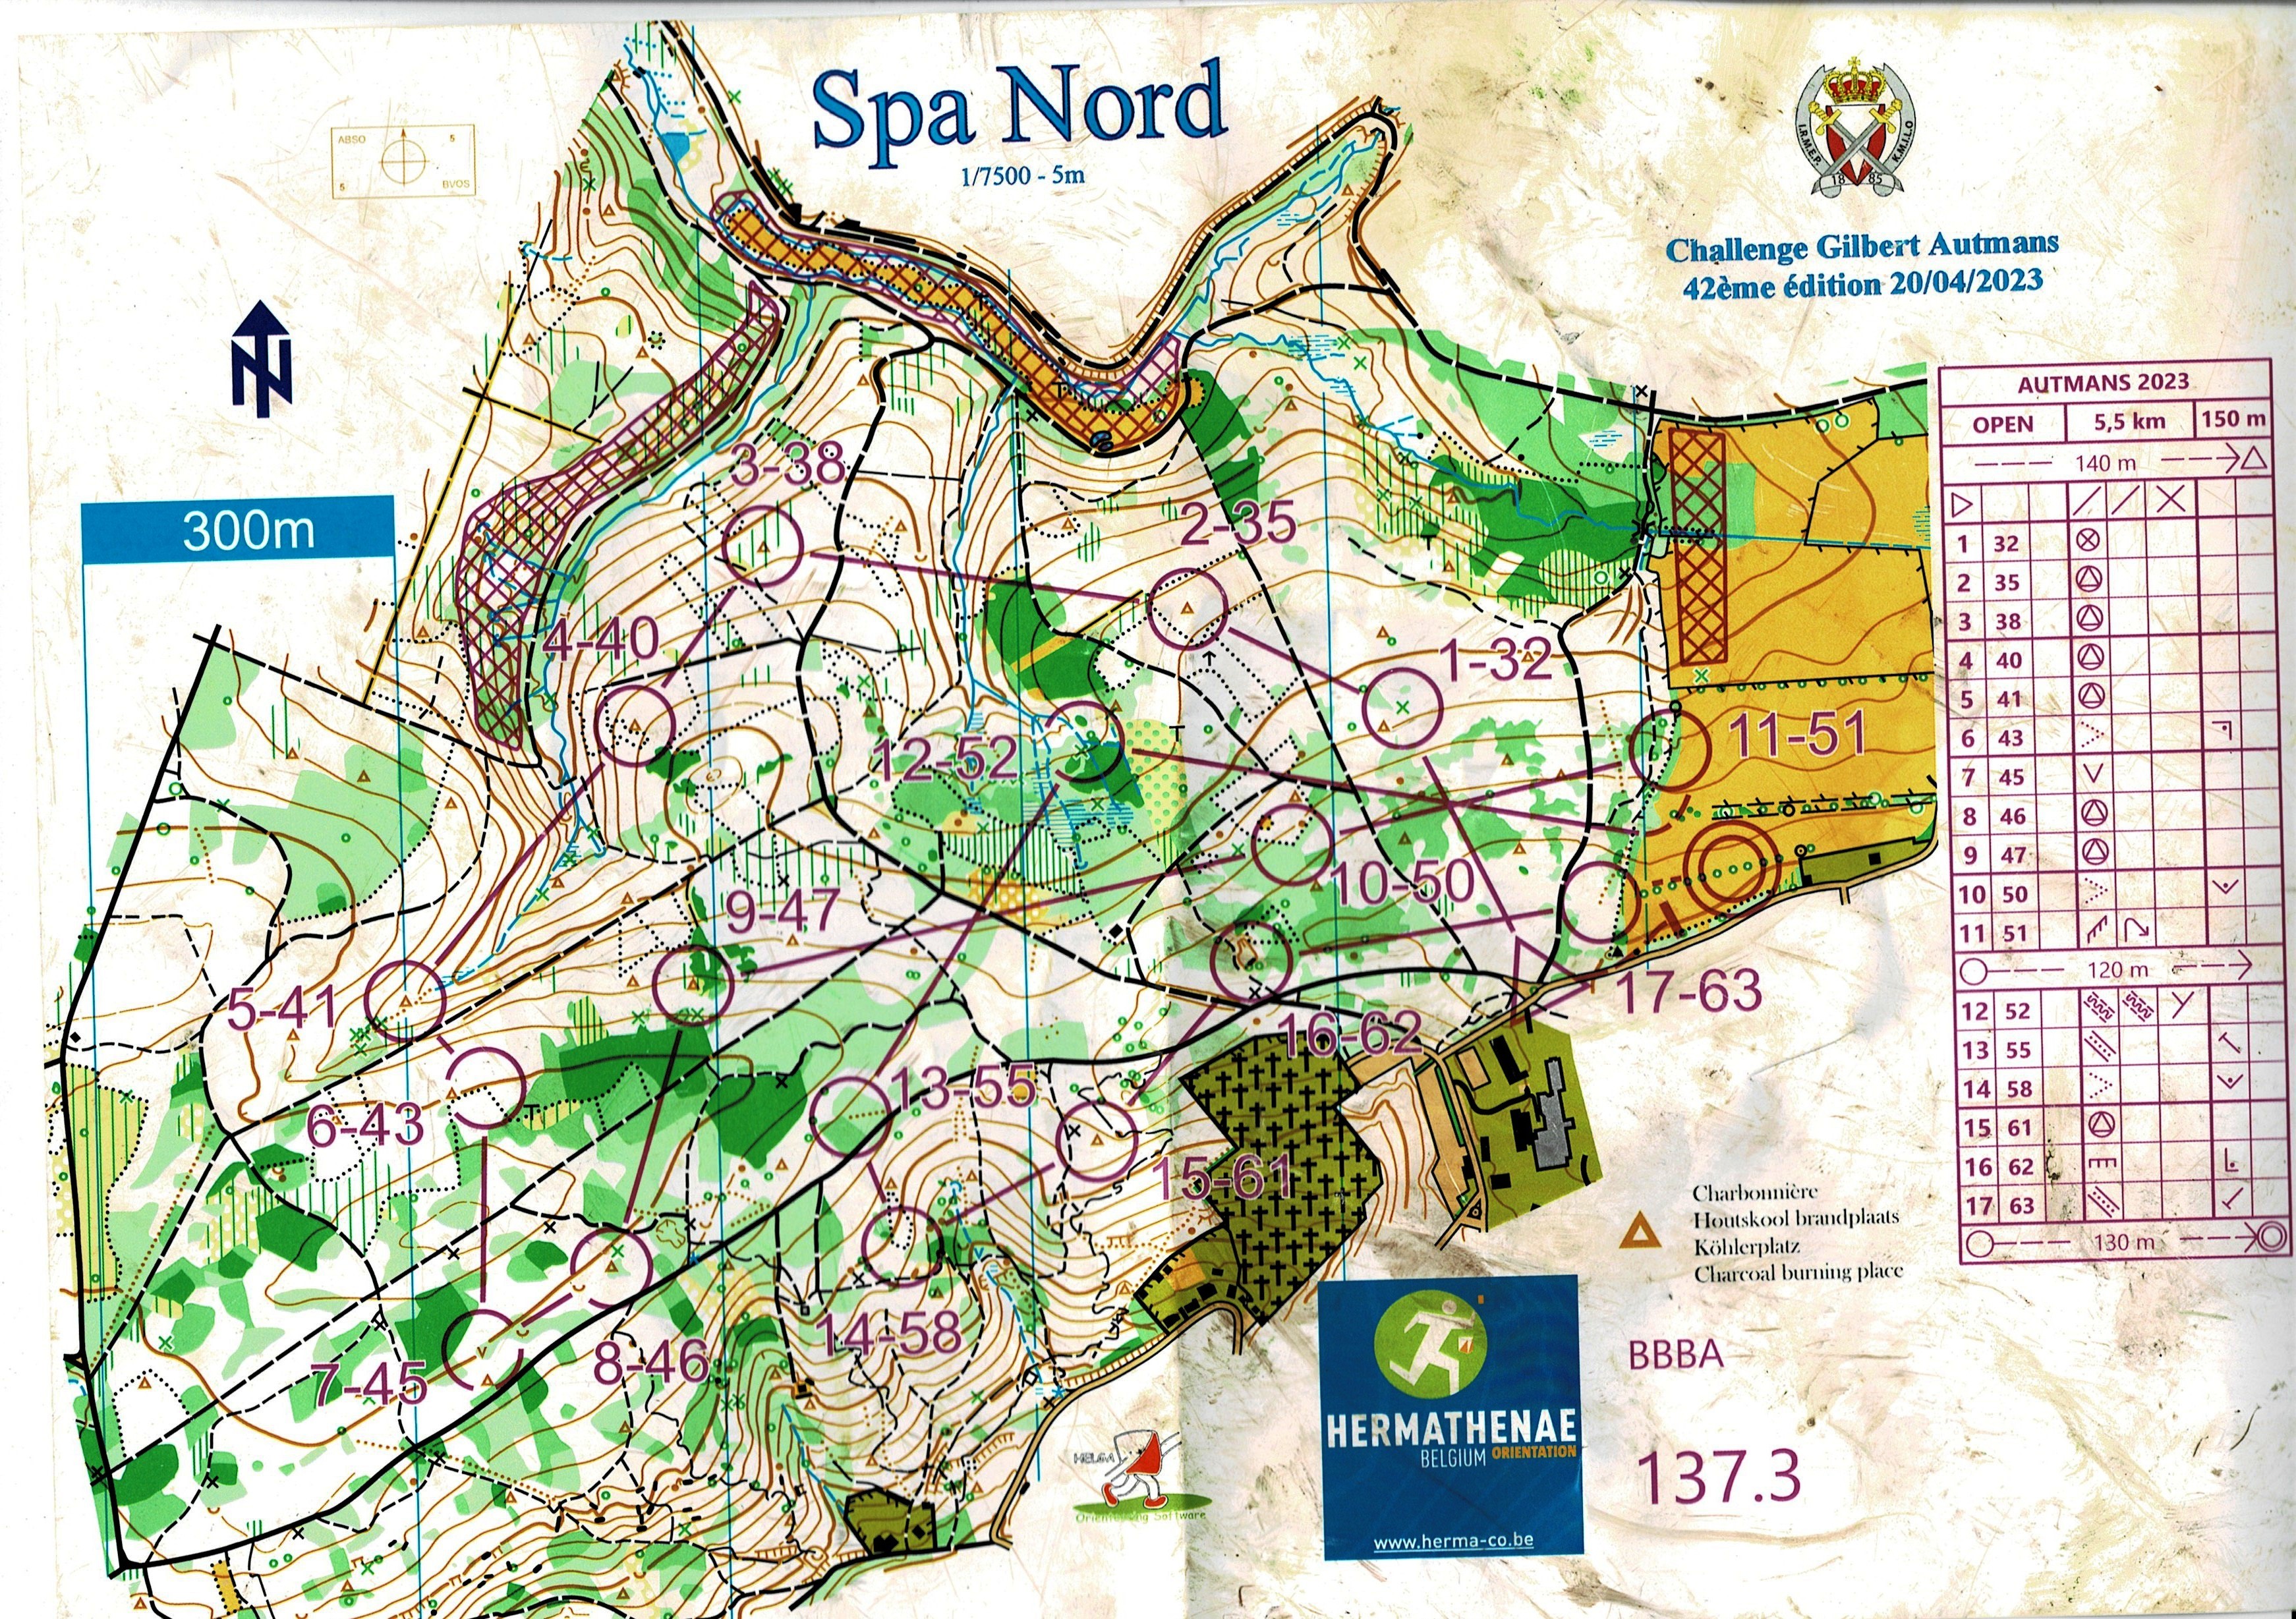 Spa Nord (20-04-2023)